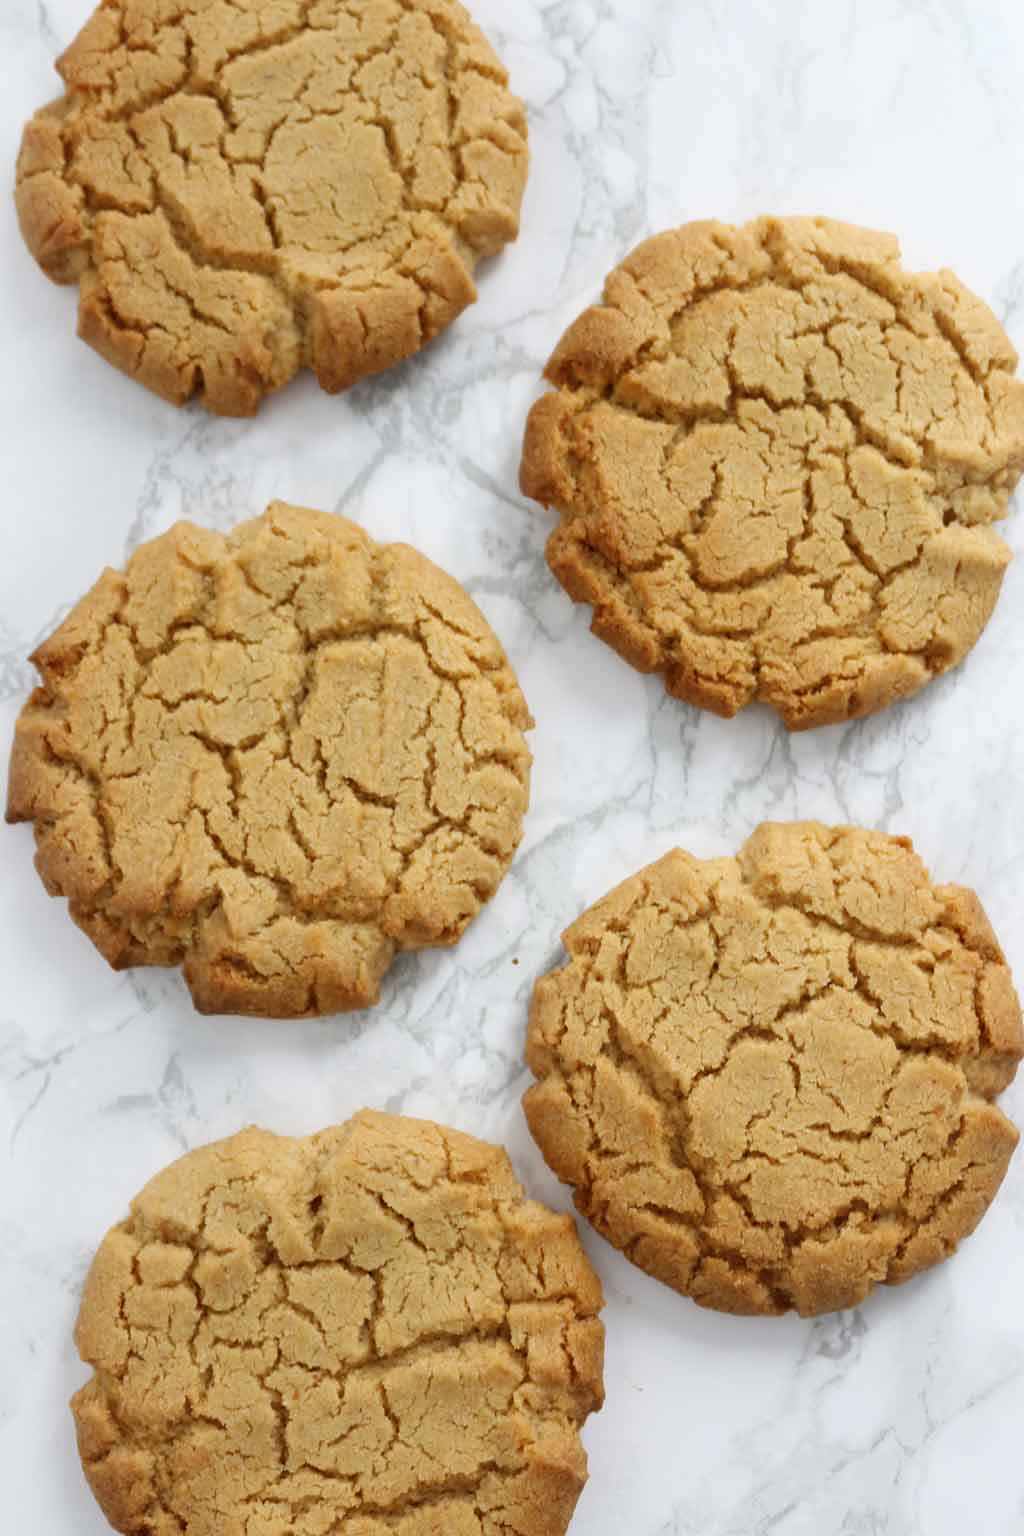 Peanut Butter vegan Cookies laying flat on a white surface